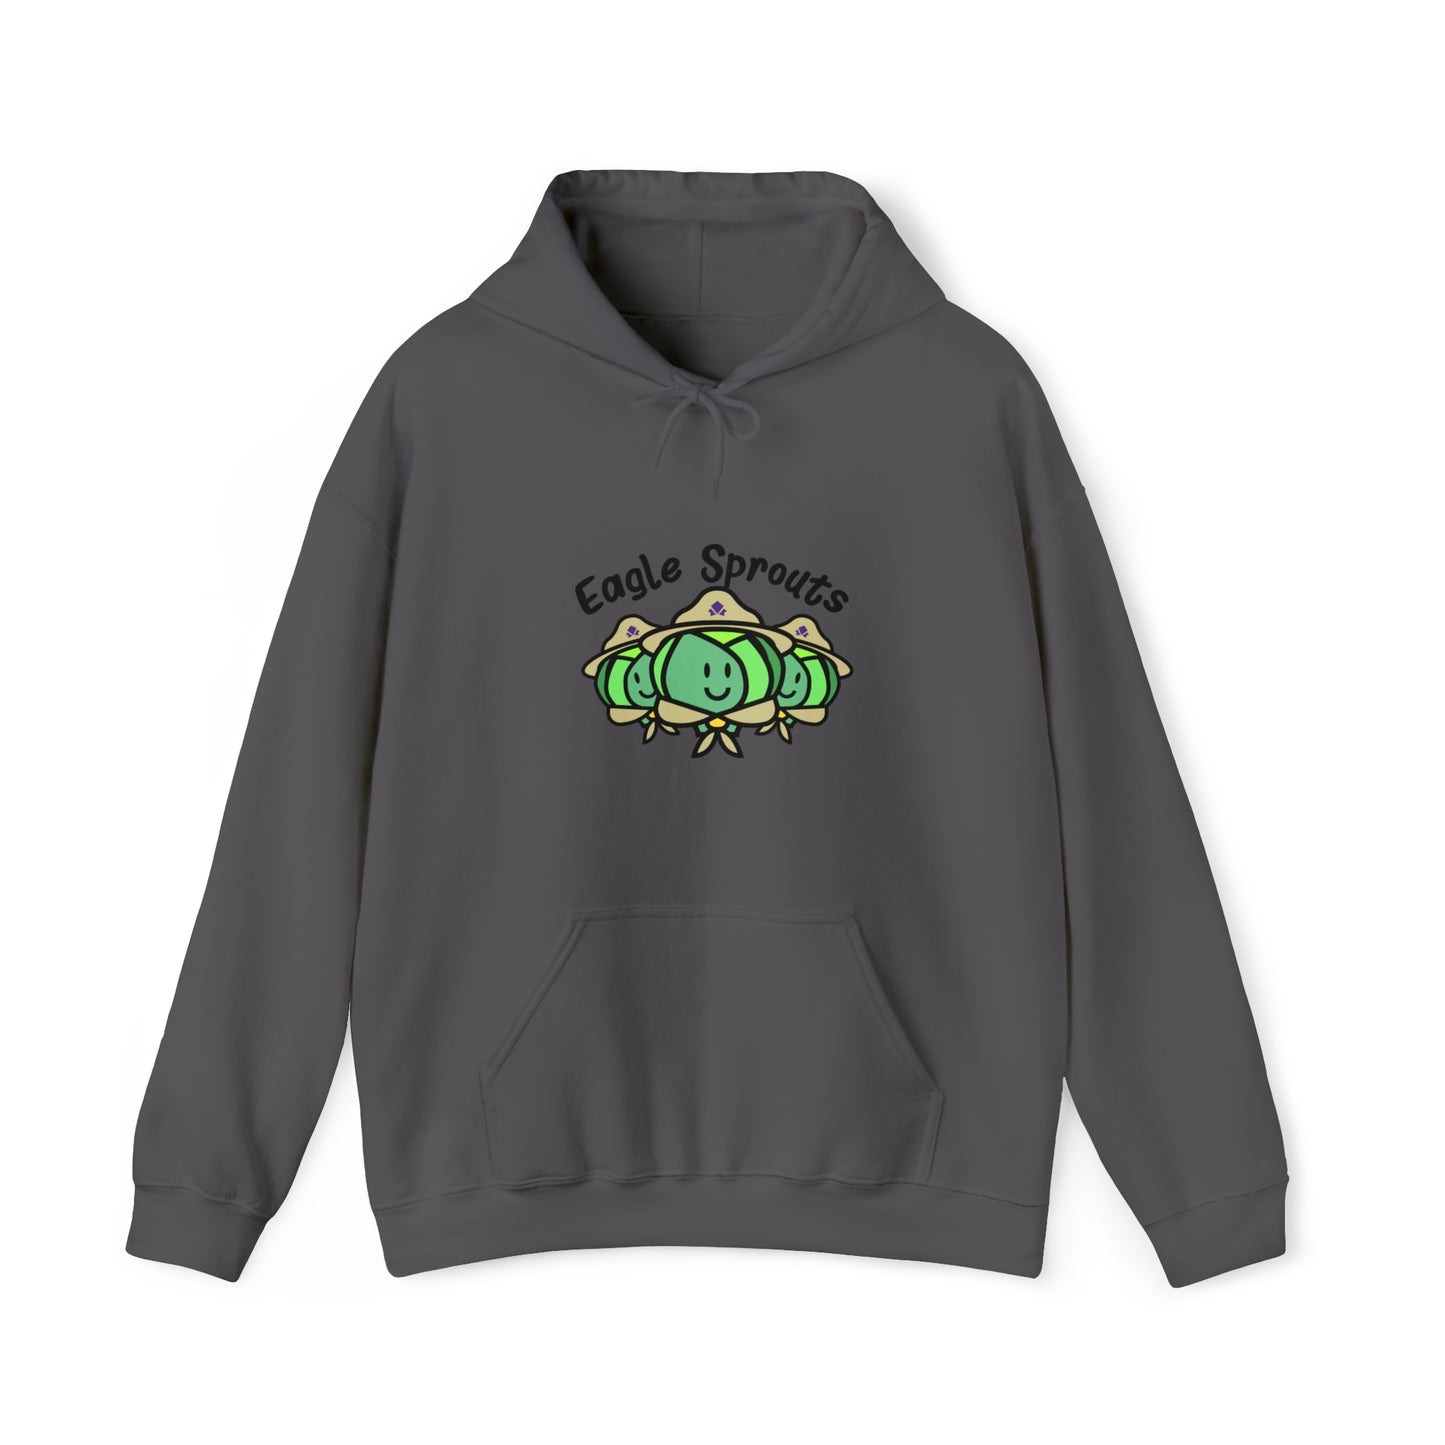 Custom Parody Hooded Sweatshirt, Eagle Sprouts (Brussel Sprouts) design